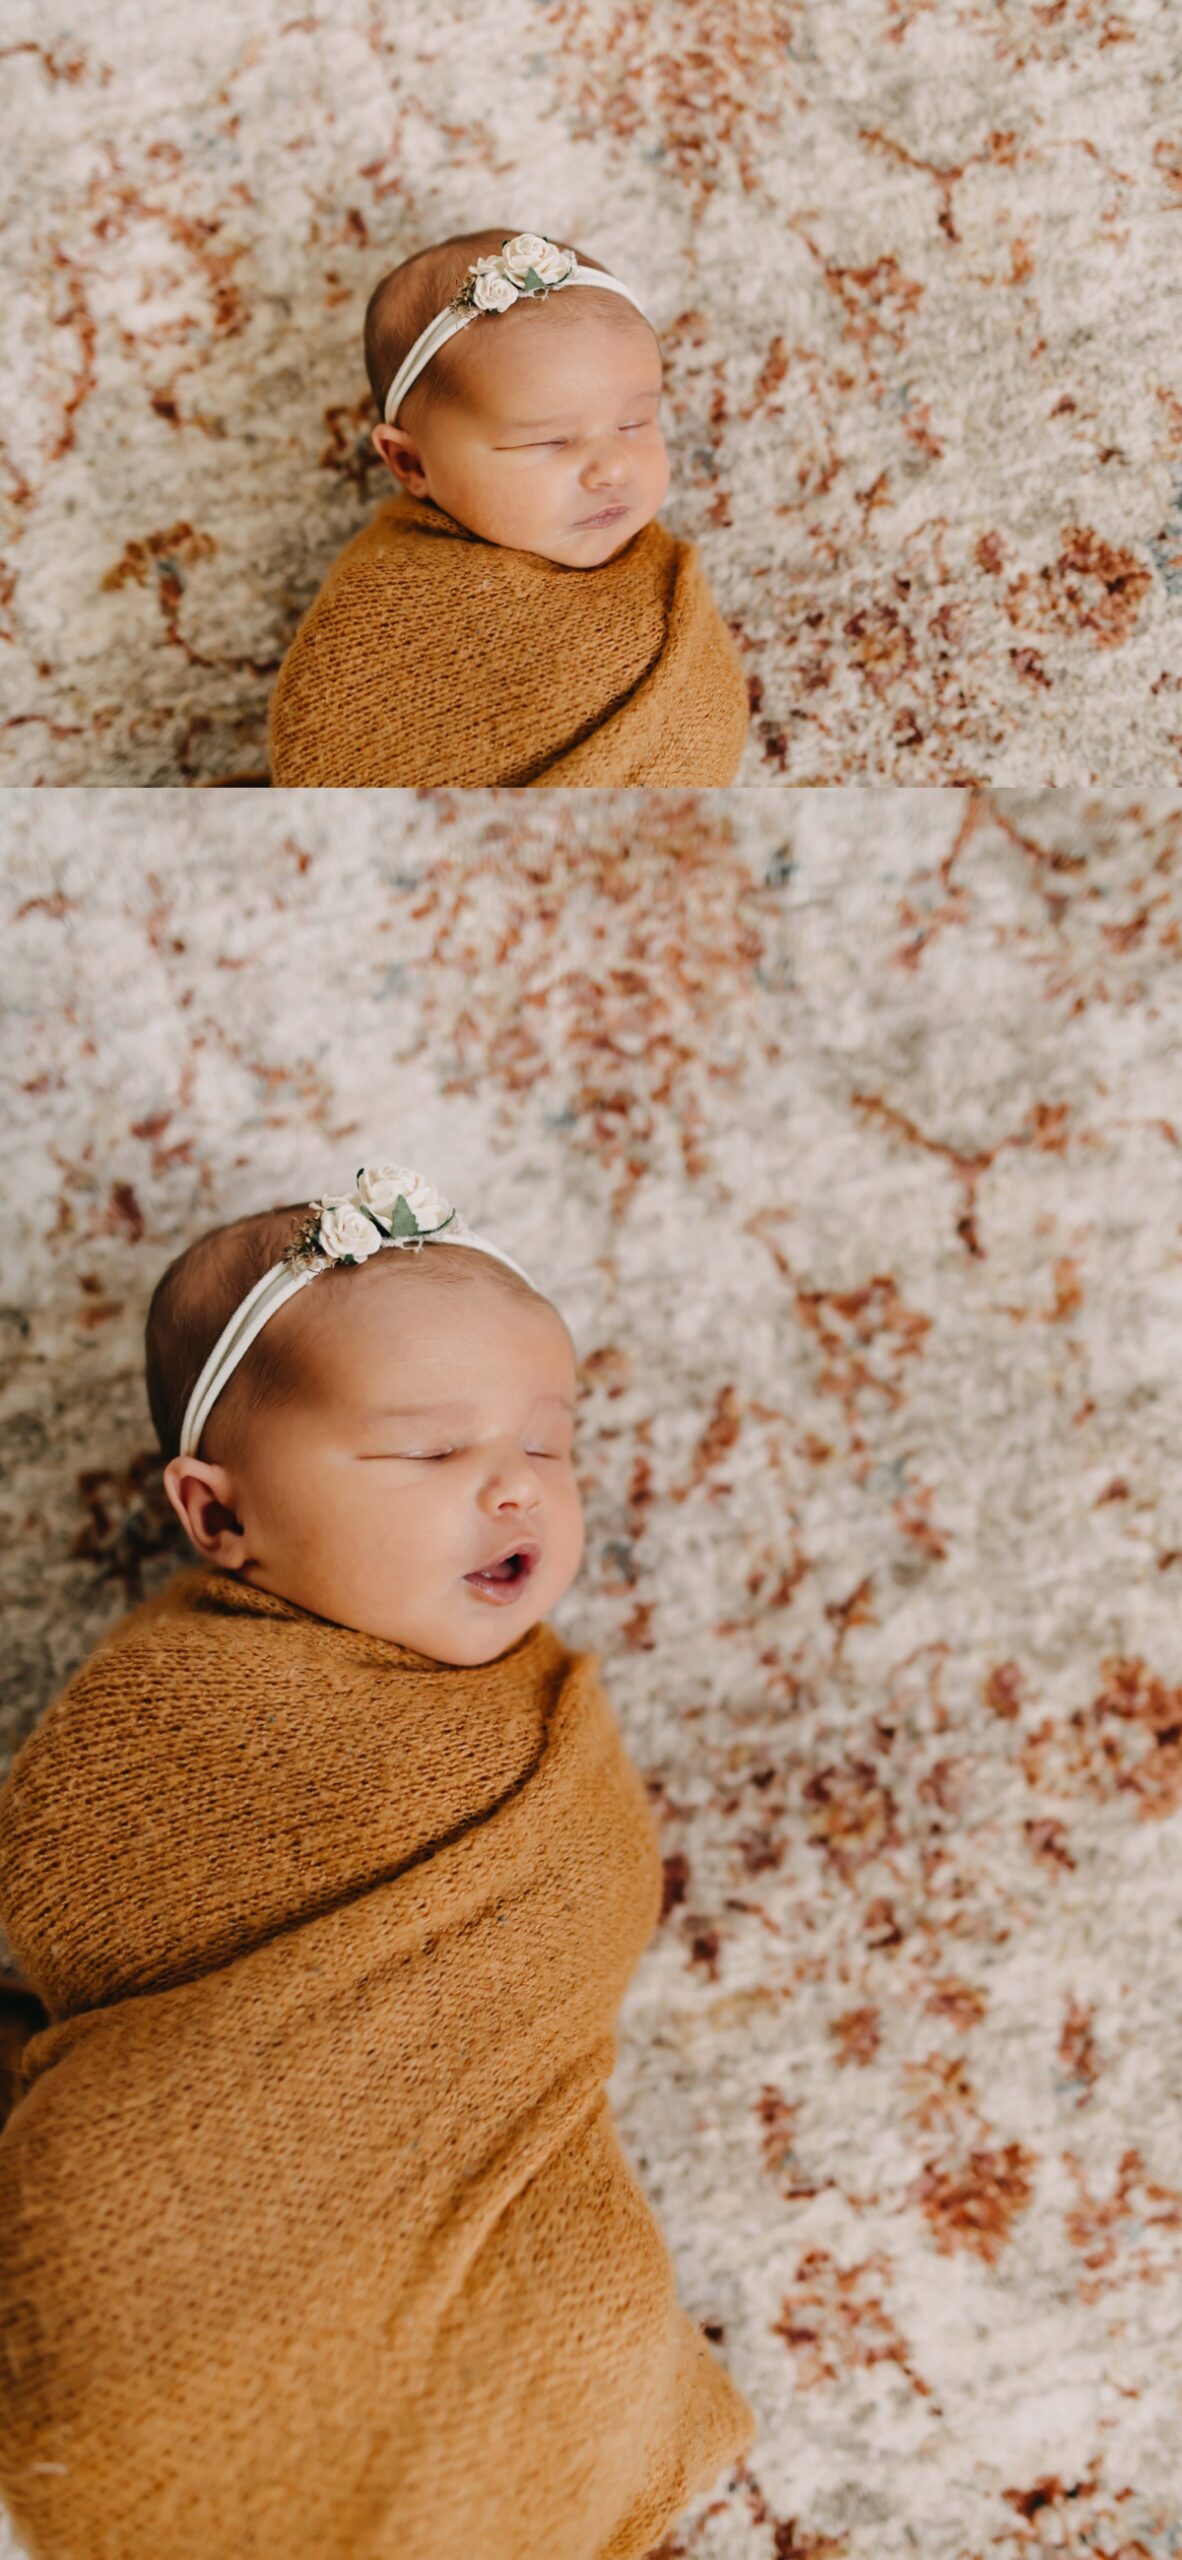 Newborn photos with a baby girl wrapped with a flower headband